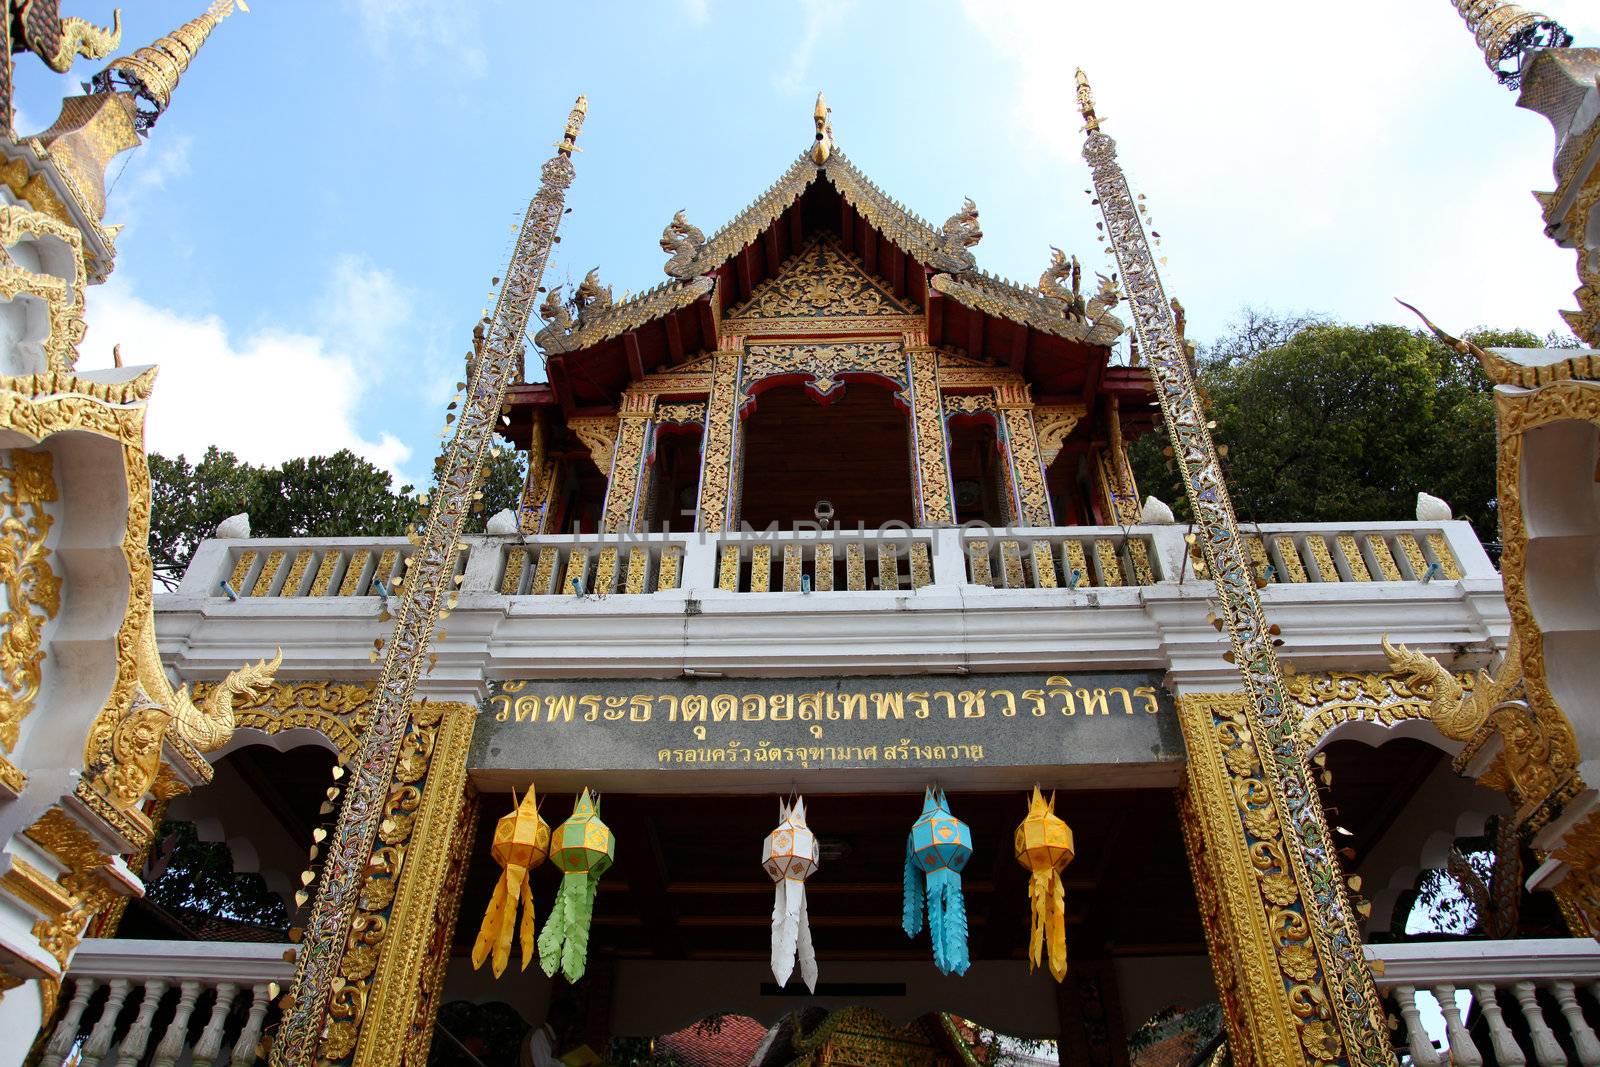 Exterior of a traditional Thai building in Chiang Mai, Thailand - travel and tourism.